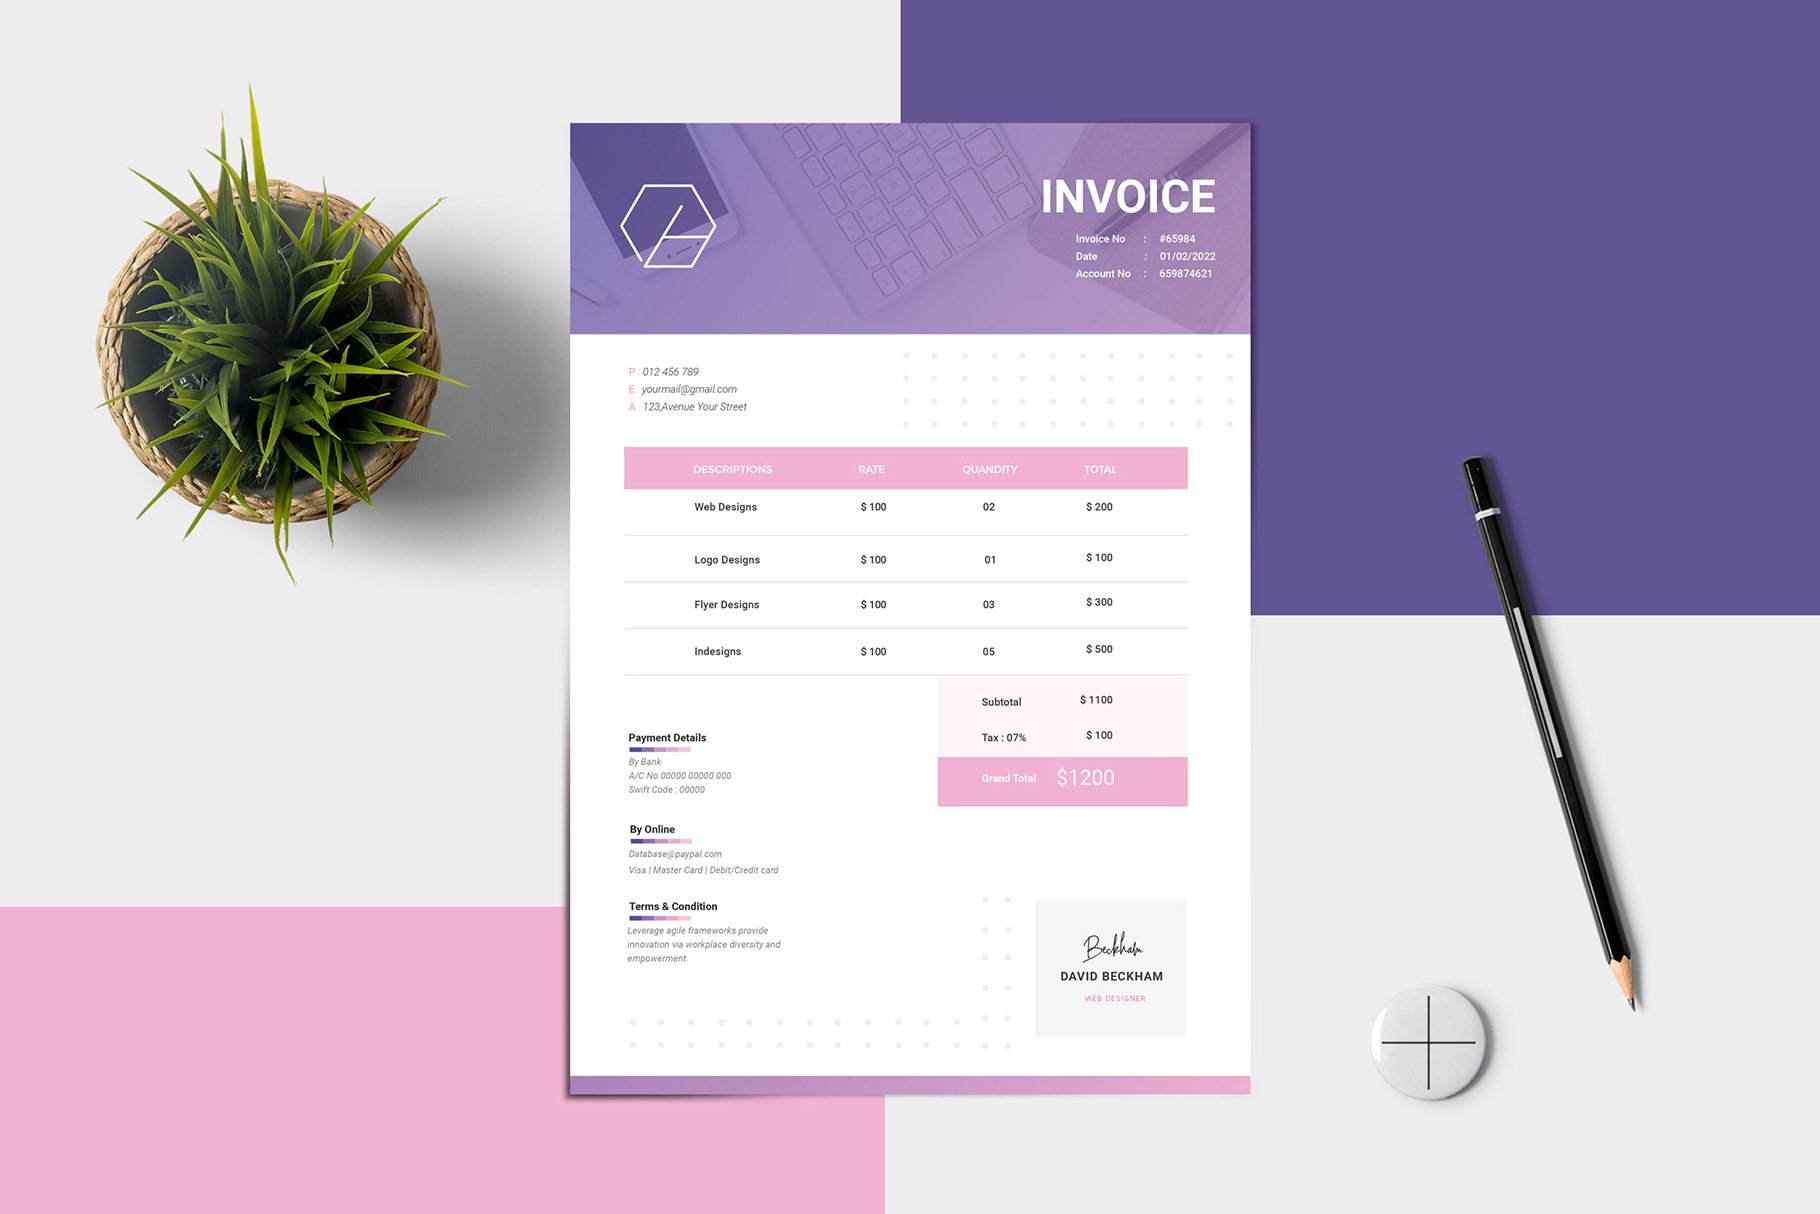 The Minimal Invoice Template cover image.